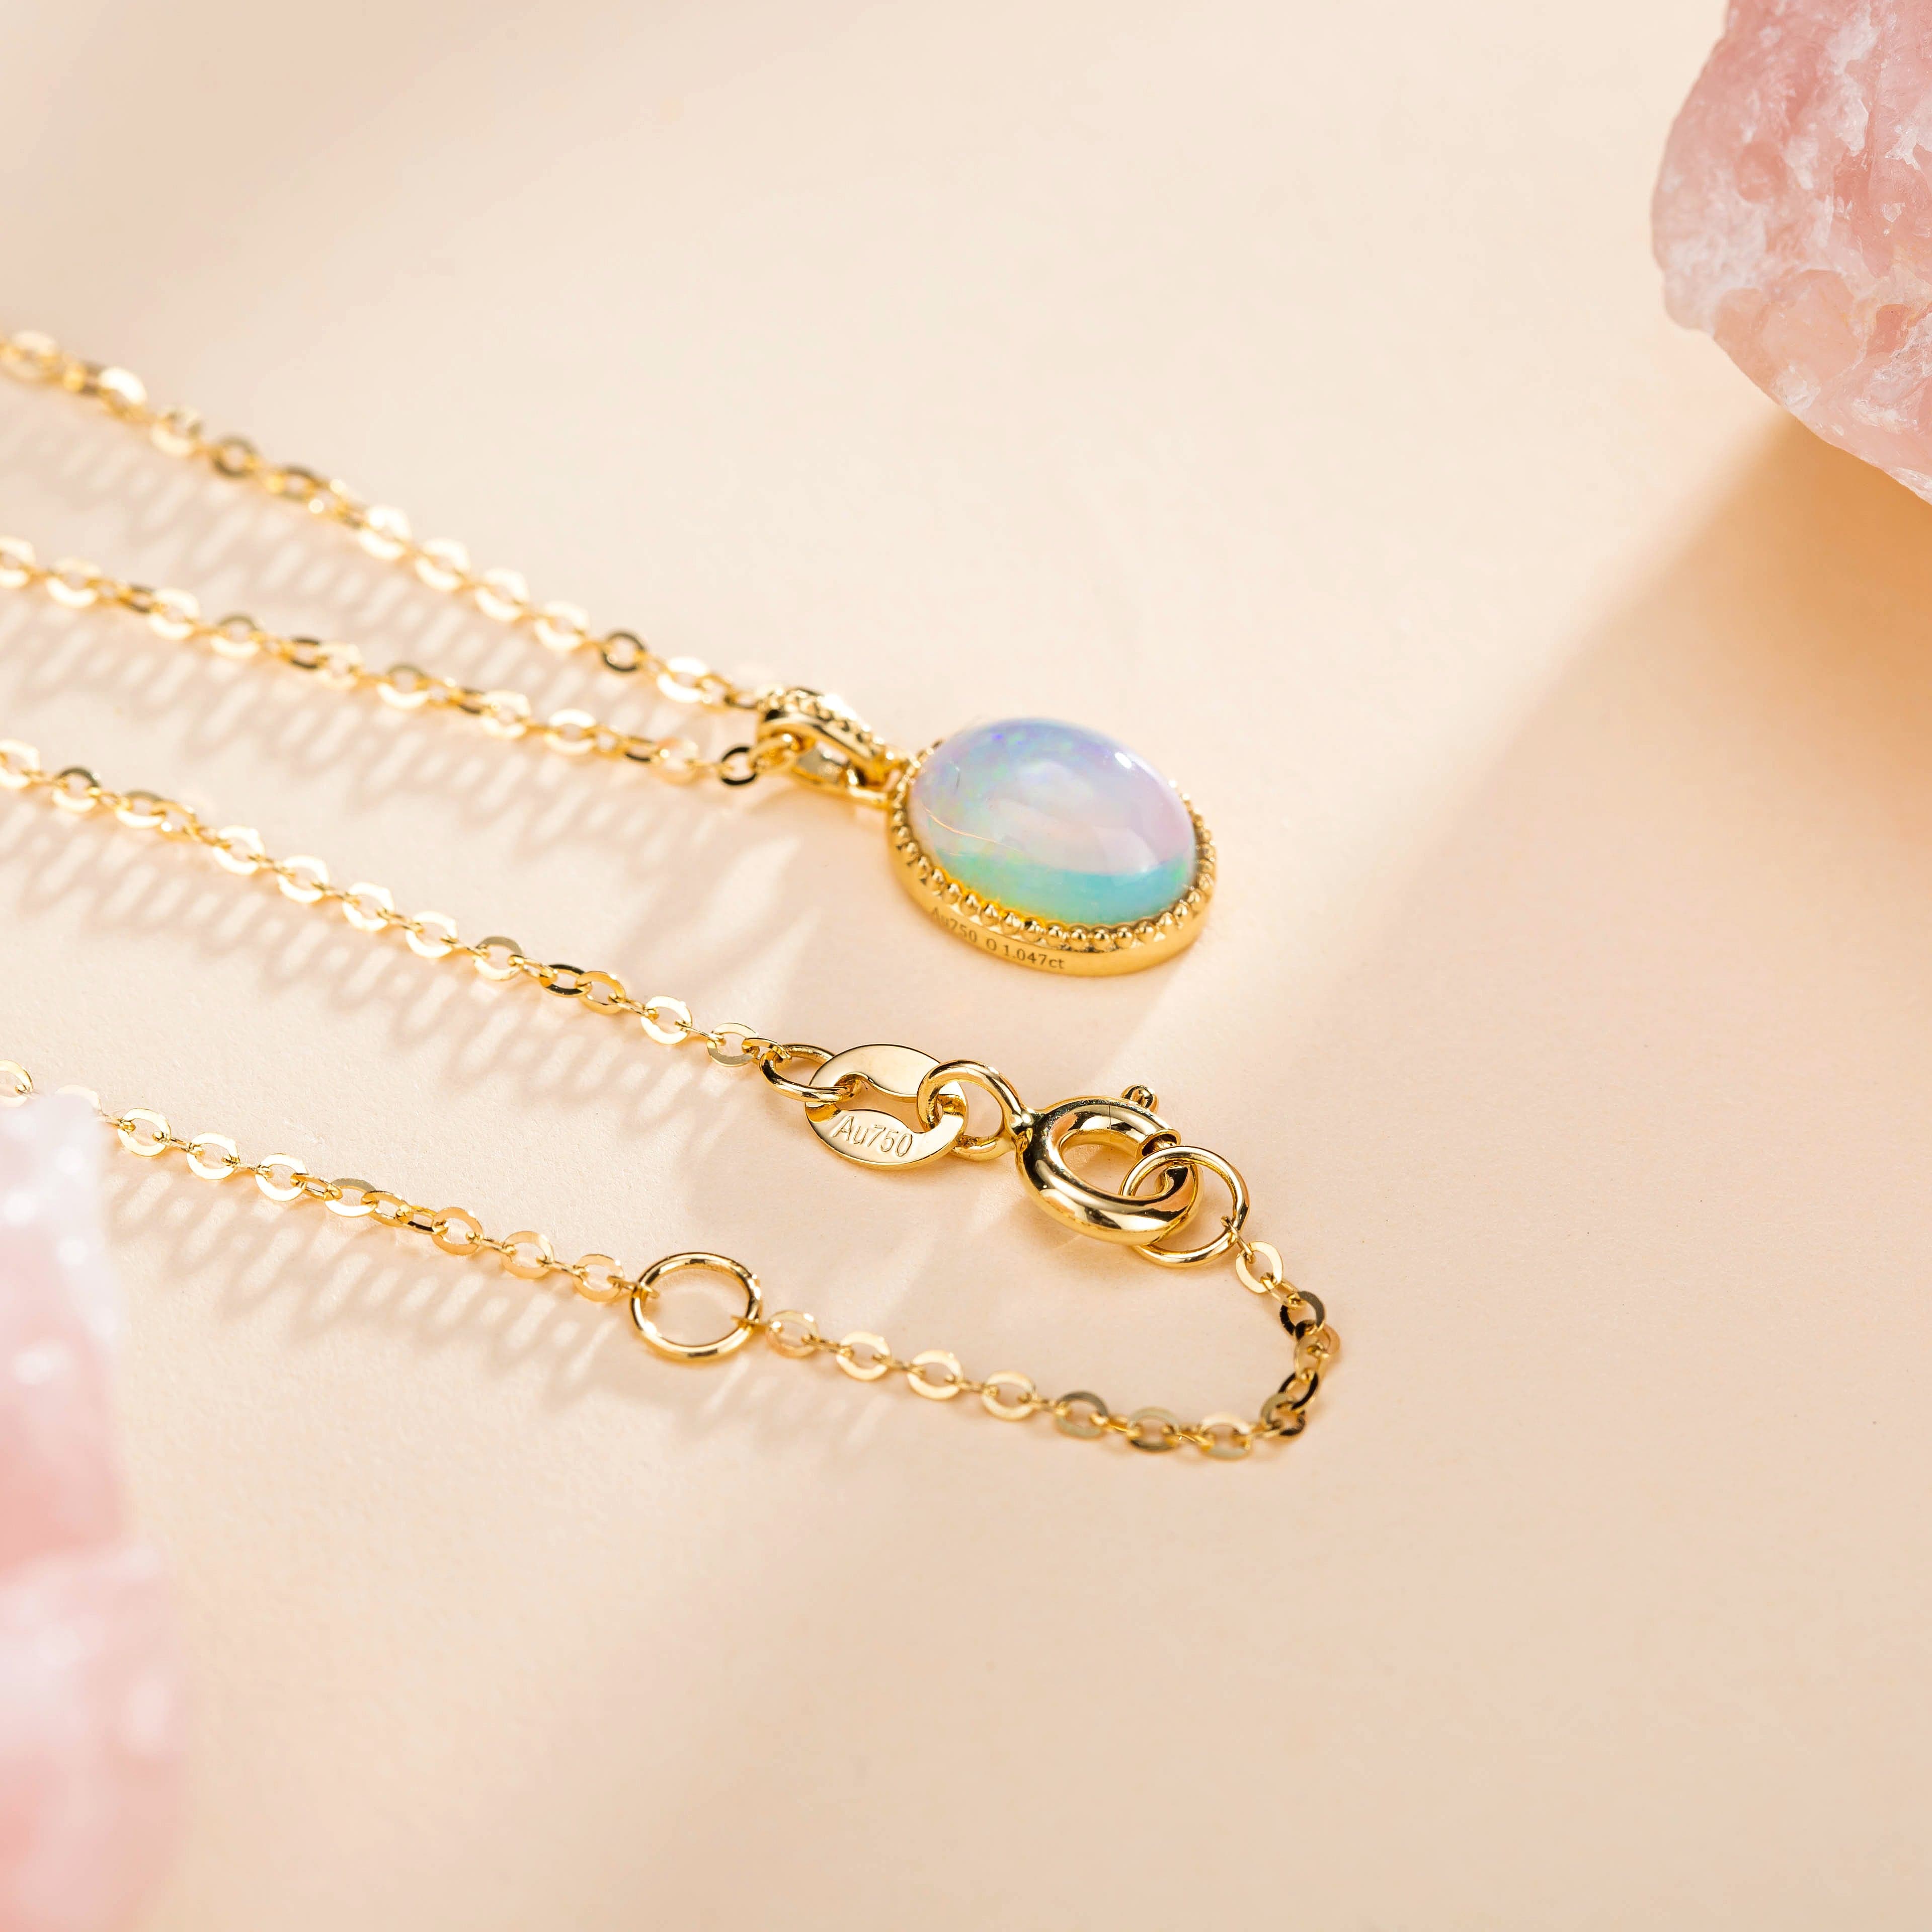 FANCIME "Maria" Natural Opal Solid 14K Yellow Gold Necklace Full